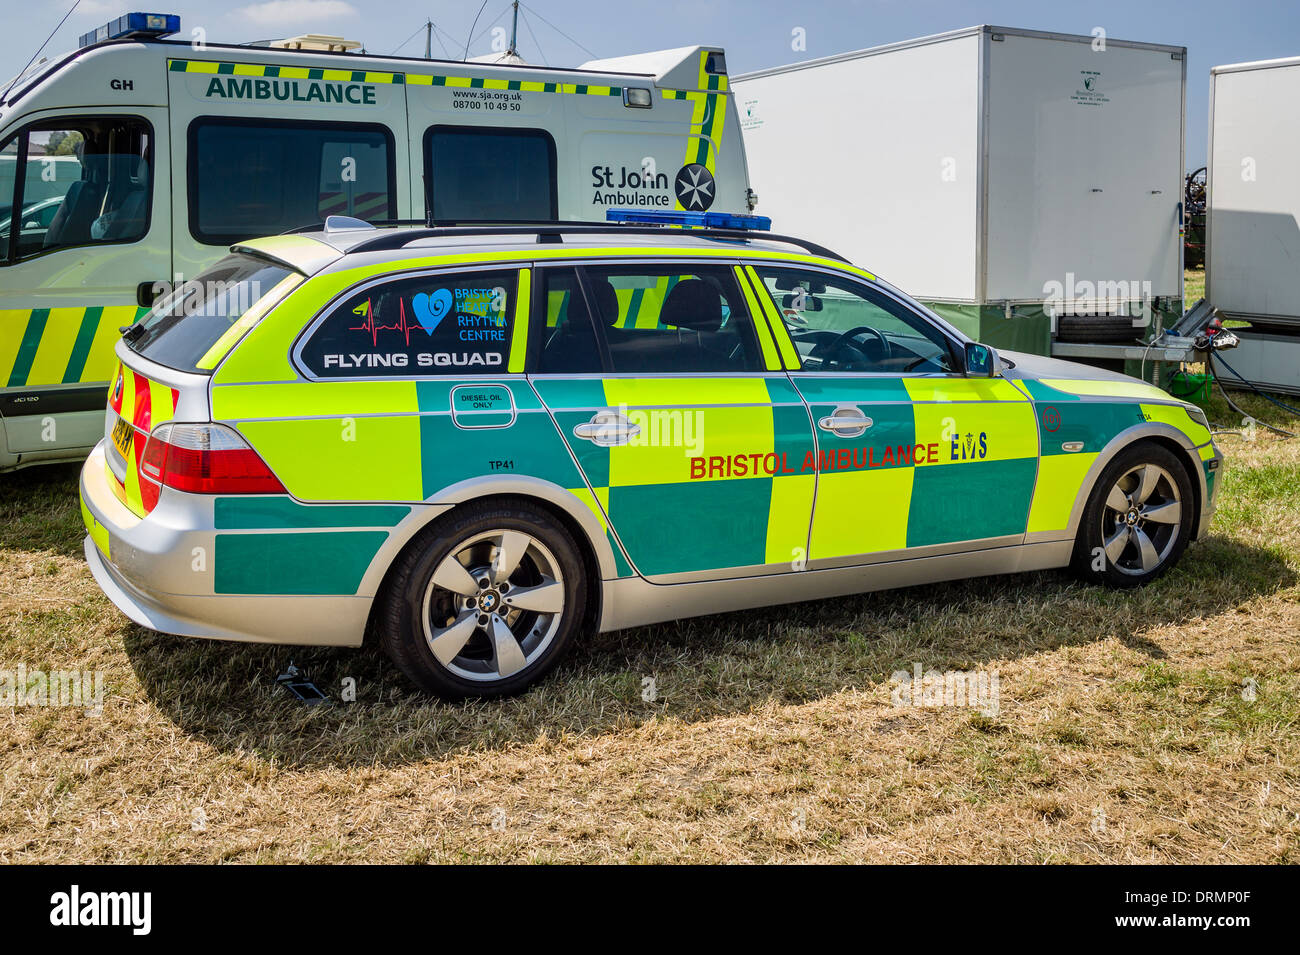 BMW Flying Squad ambulance on standby at a country outdoor event in UK Stock Photo